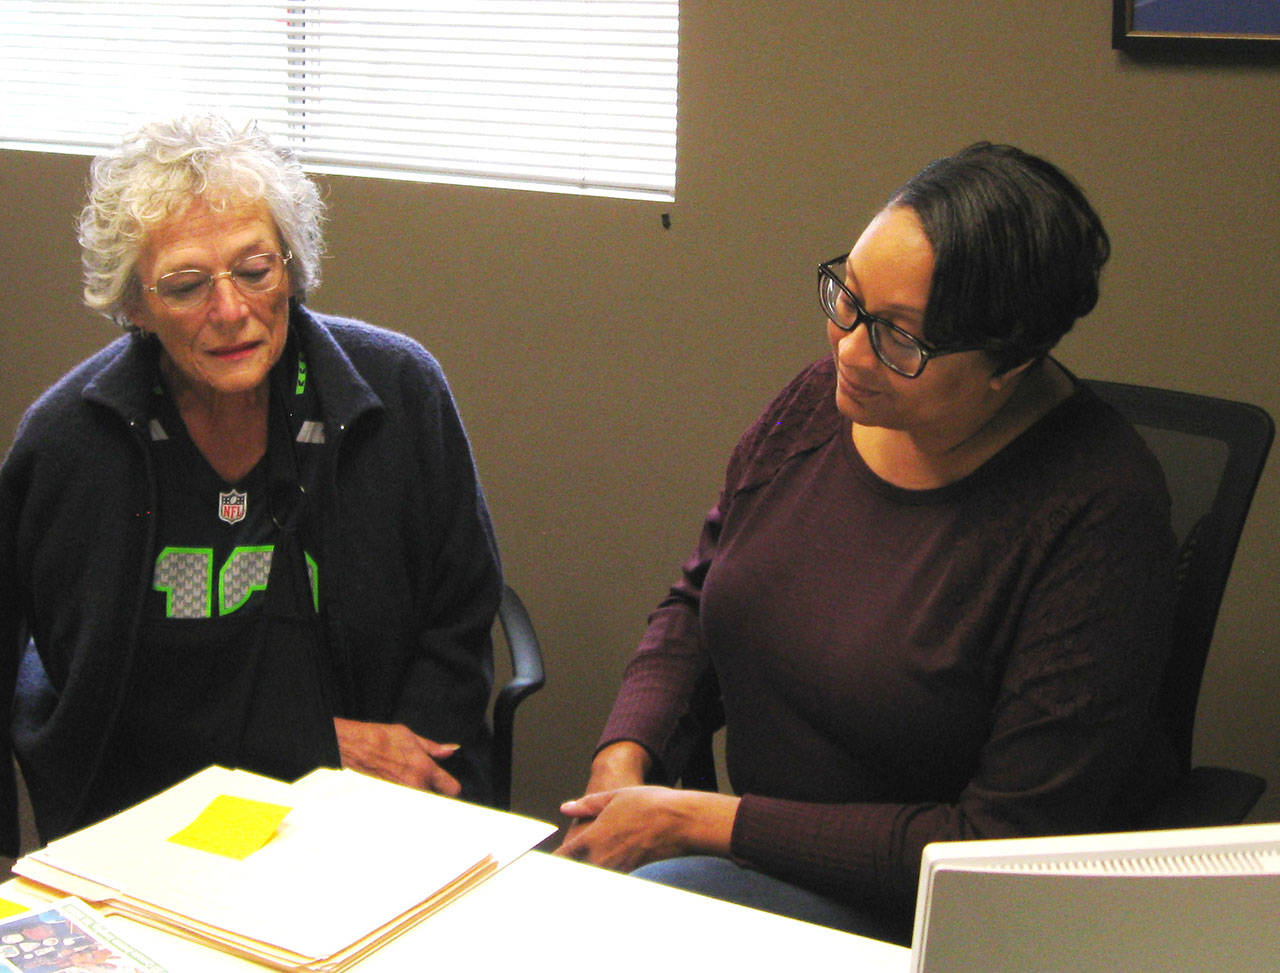 Photo by Dave Felice                                &lt;em&gt;Maureen MacDonald (left) of the Genealogical Society of South Whidbey Island (GSSWI) looks at documents with Island County Historical Society archivist Cassie Rittierrodt.&lt;/em&gt;&lt;em&gt;&lt;/em&gt;